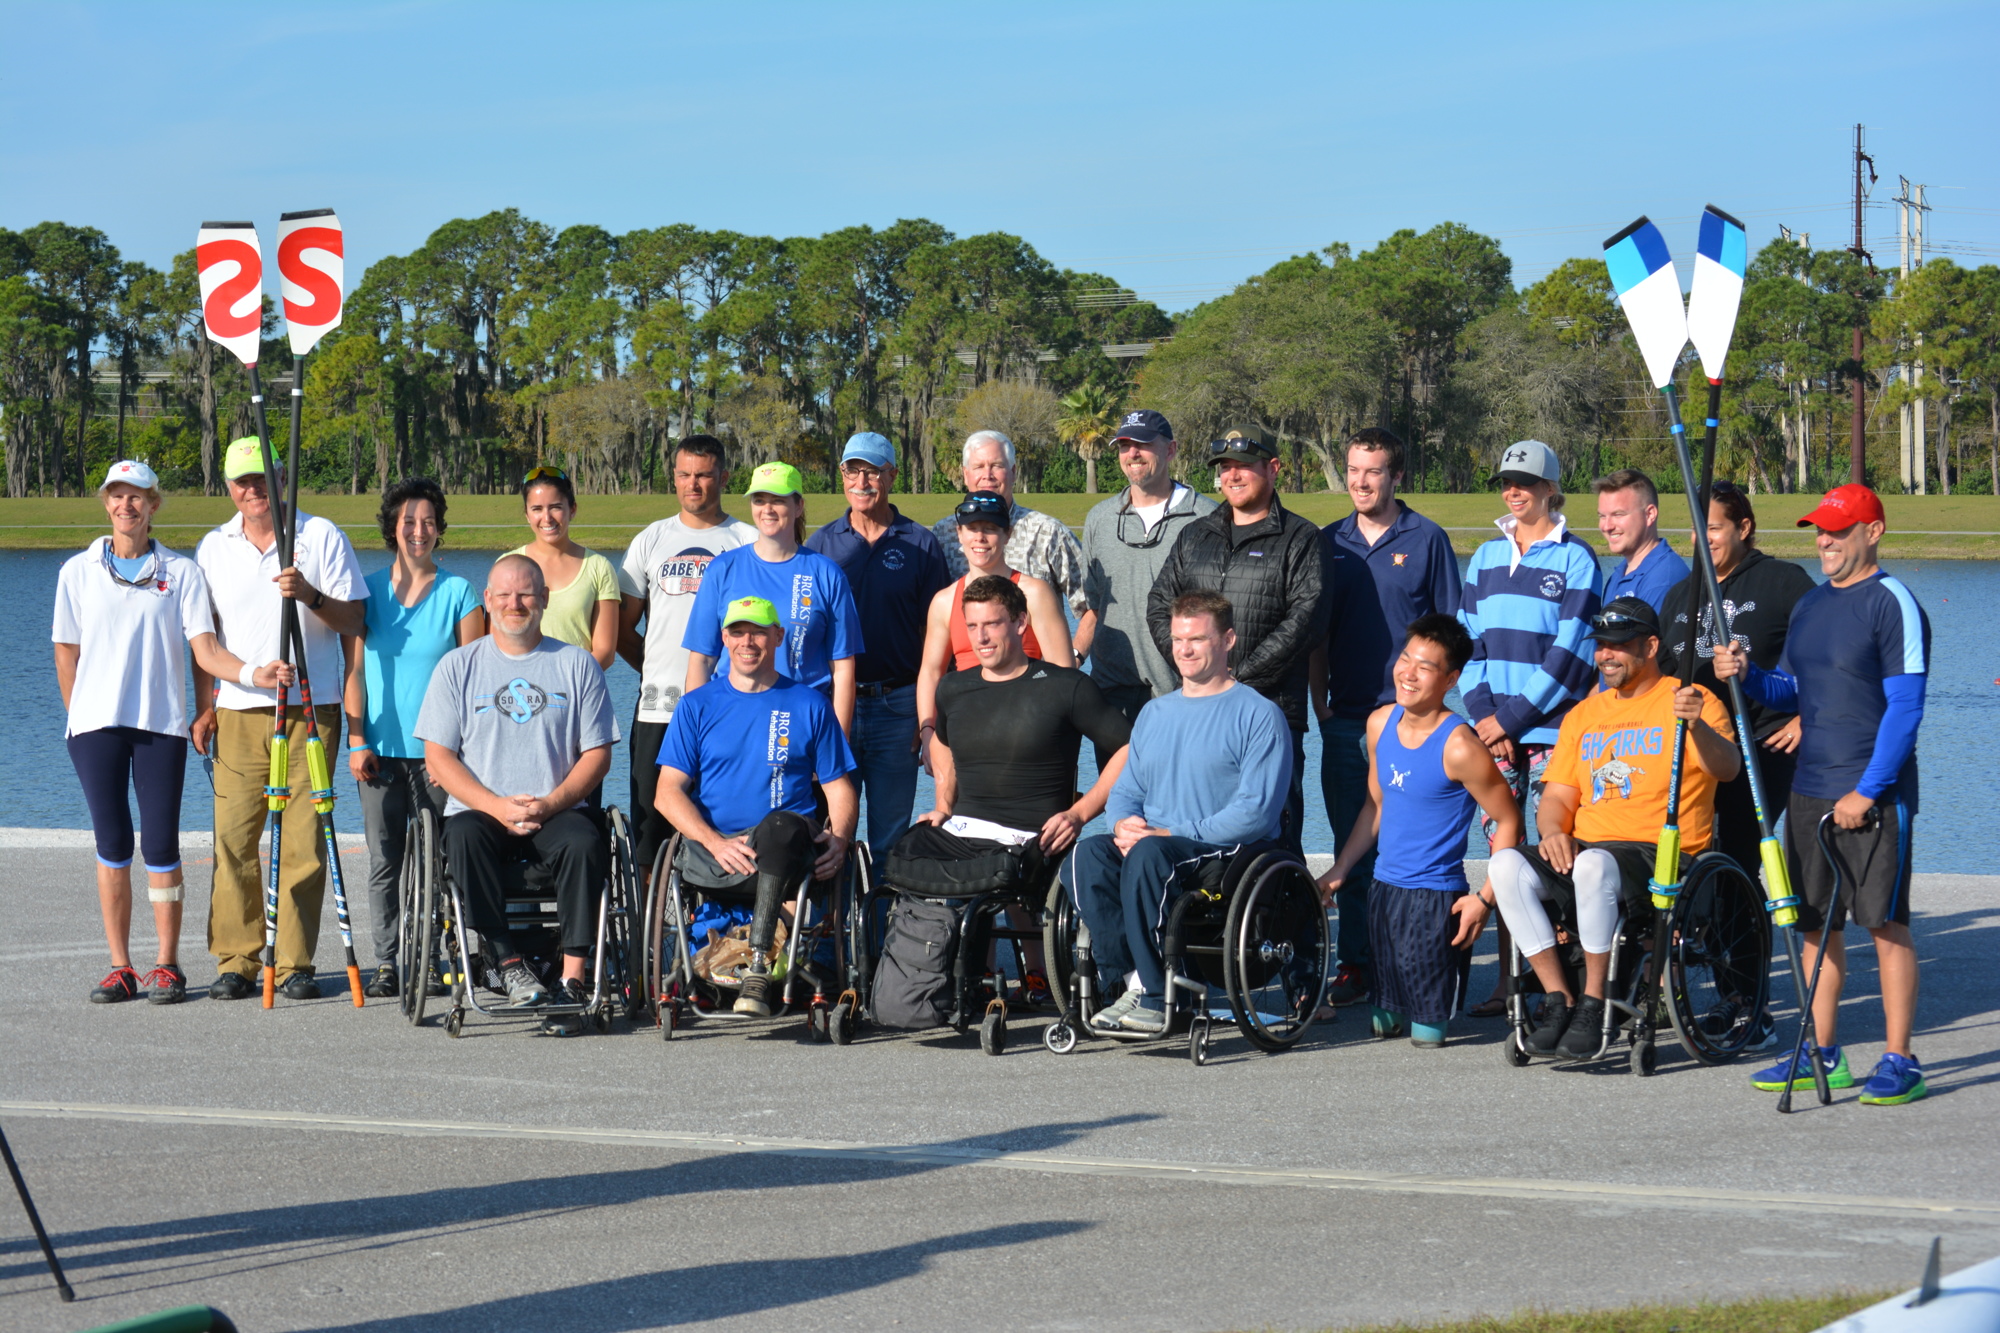 Athletes, coaches and volunteers pose after the USRowing Para Rowing Camp March 4 at Nathan Benderson Park.